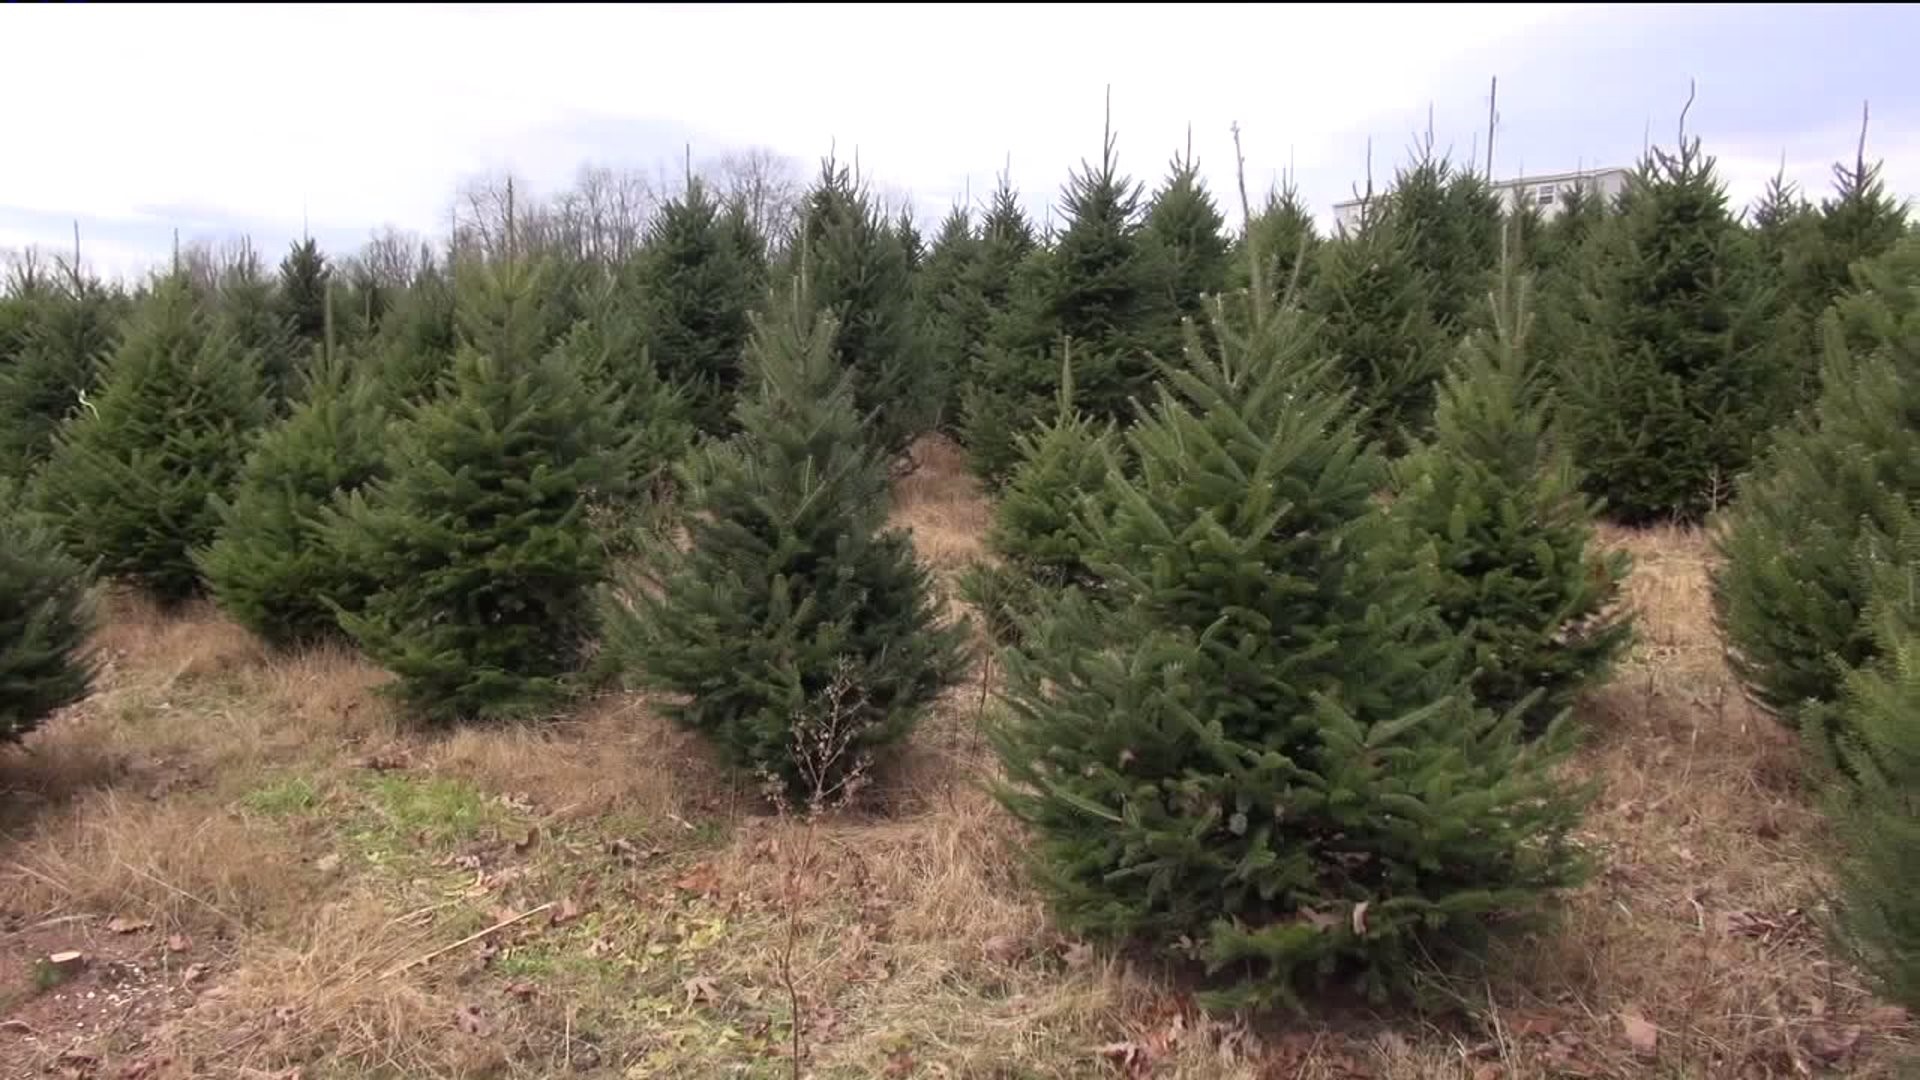 Prepping the Trees, Not the Turkeys